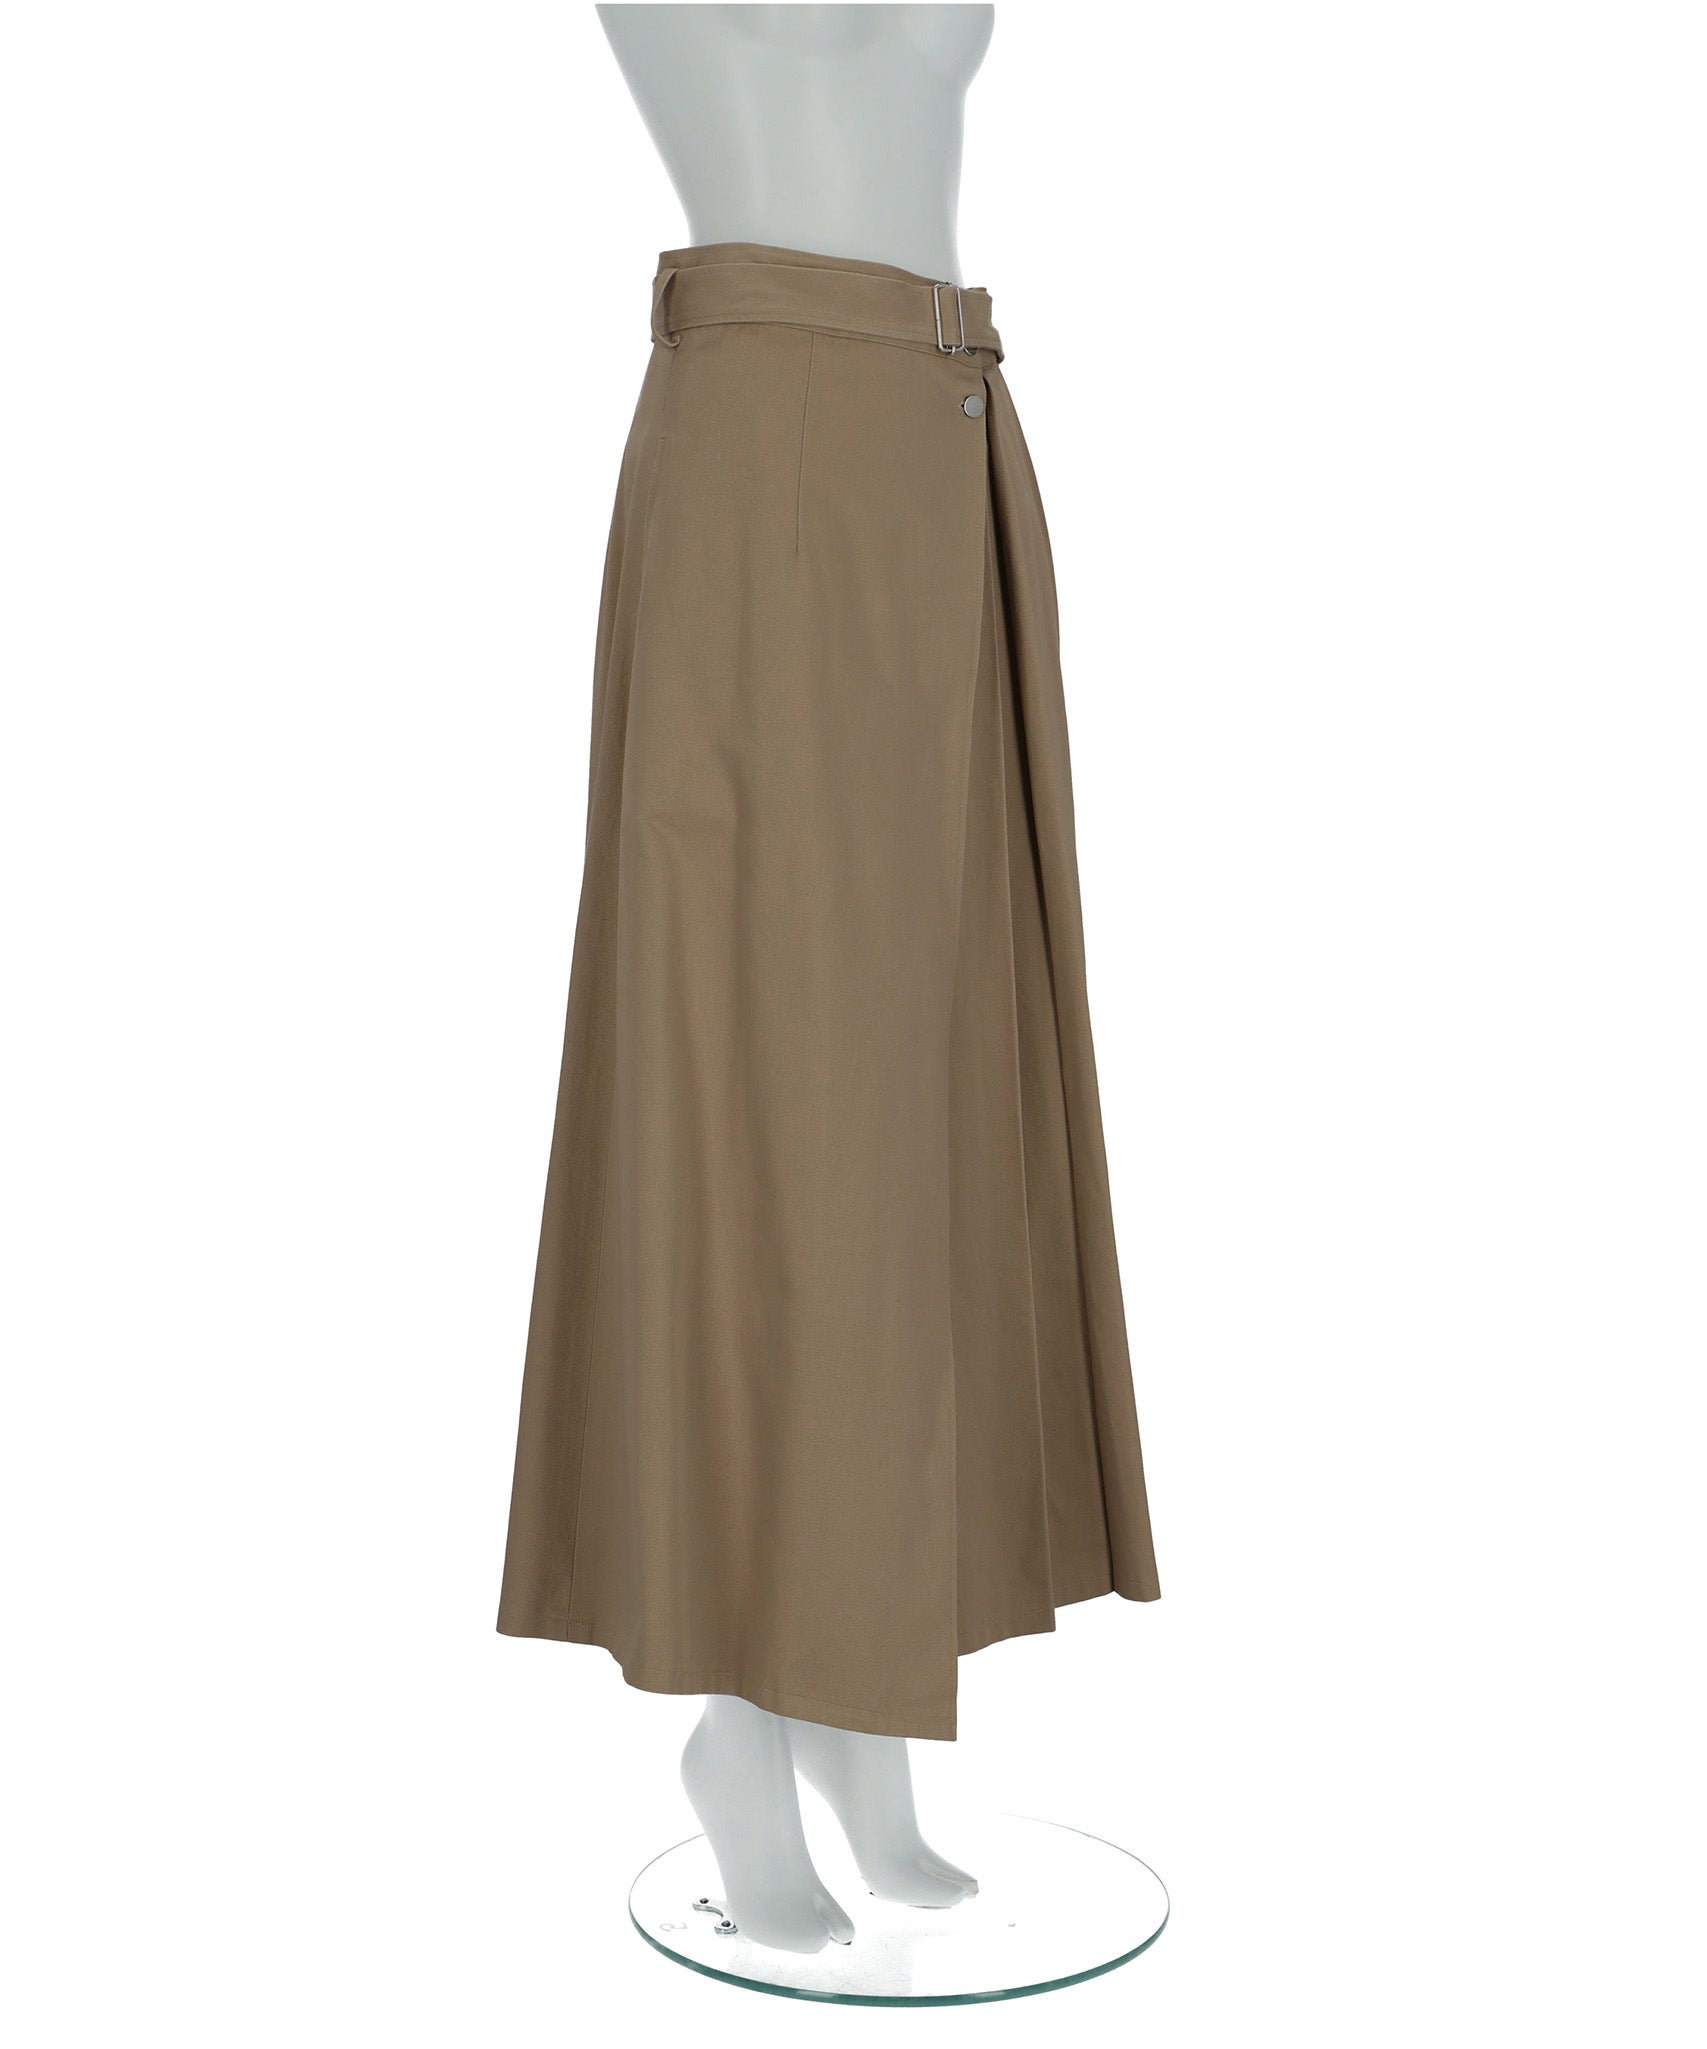 foufou trench flare skirt スカート　黒